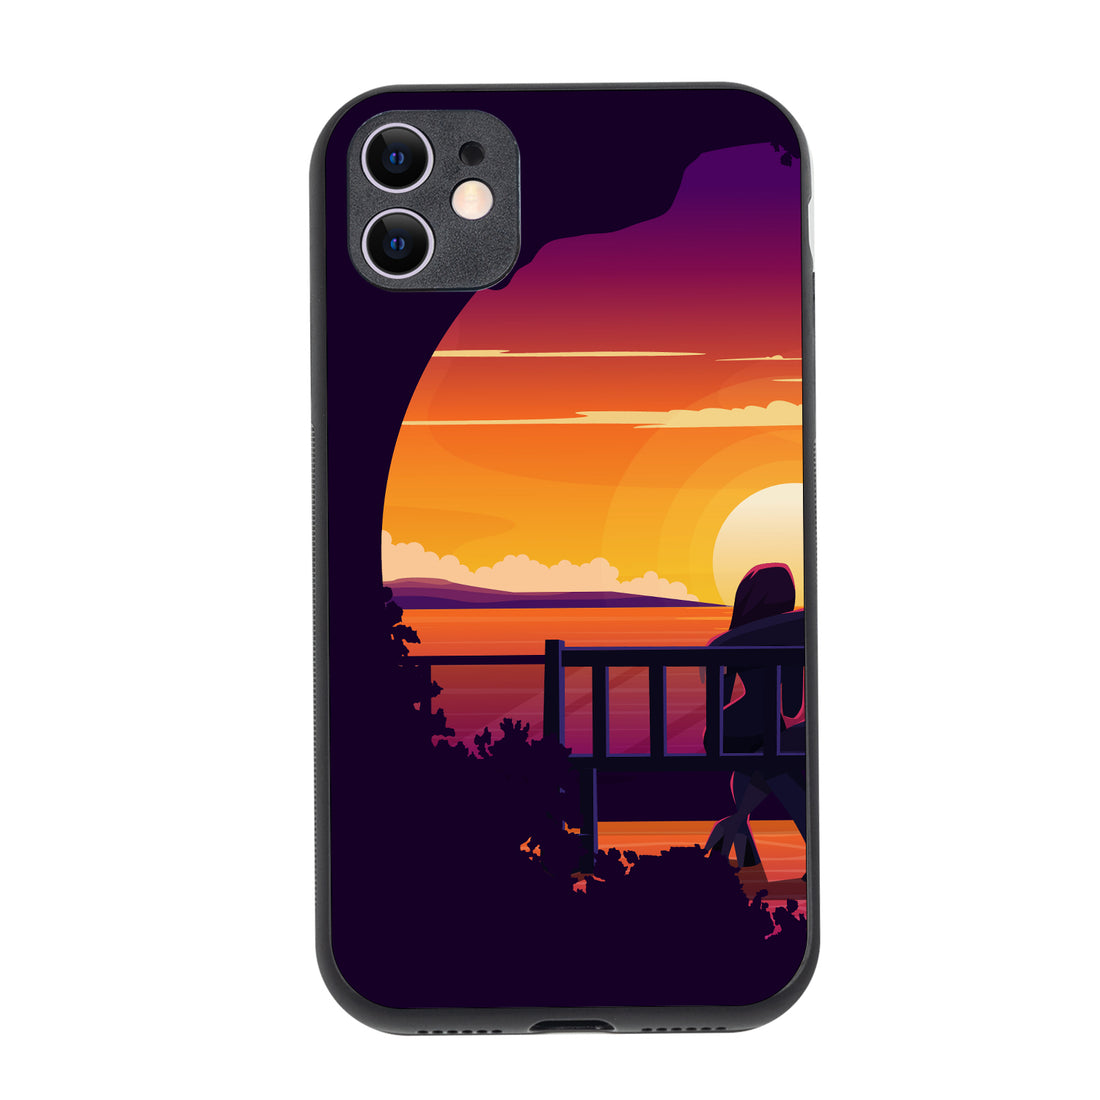 Sunset Date Girl Couple iPhone 11 Case